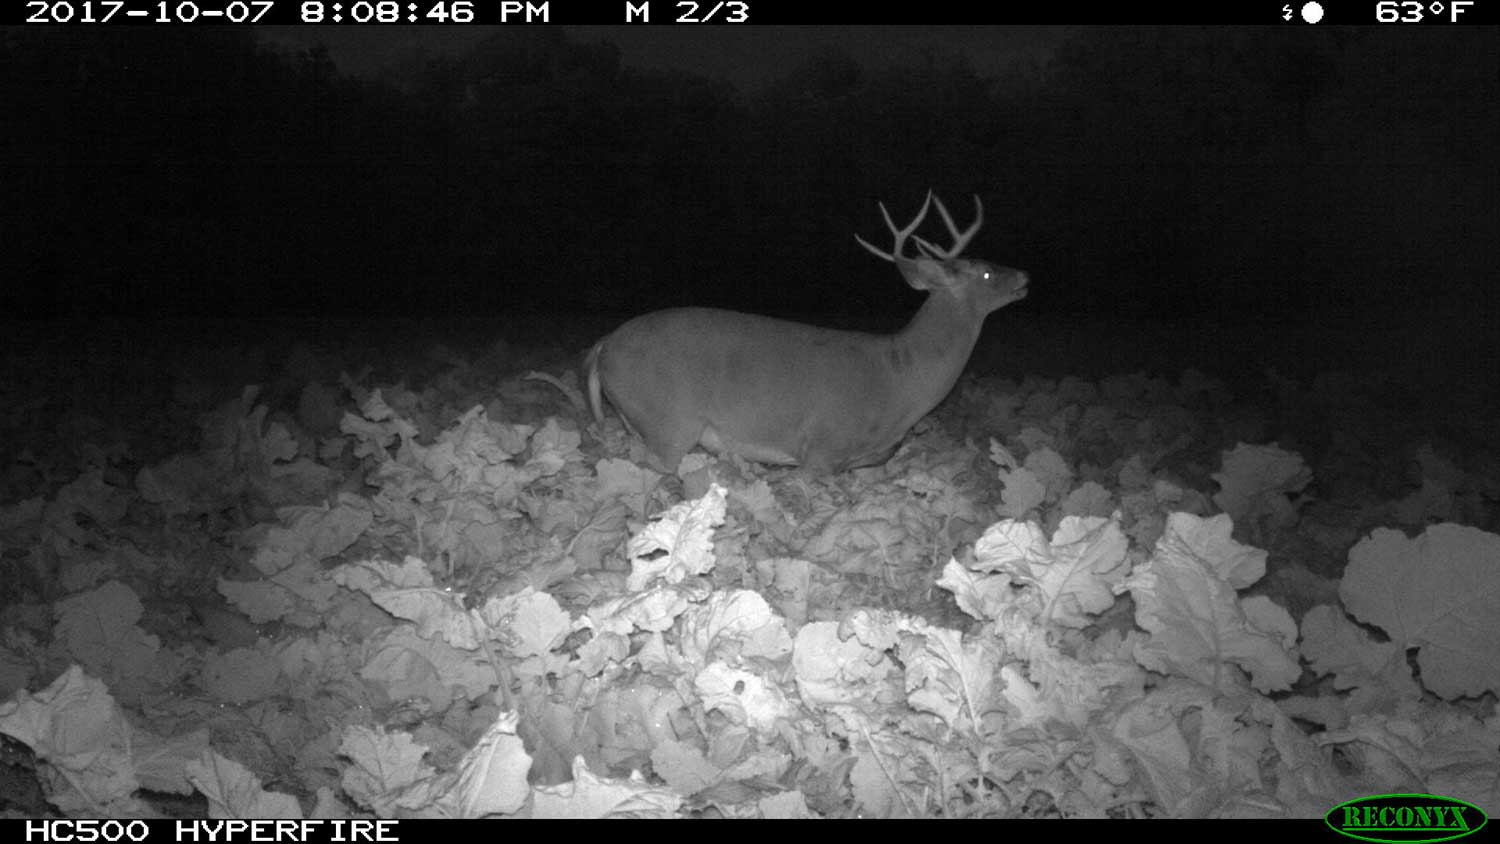 deer caught on trail camera at night